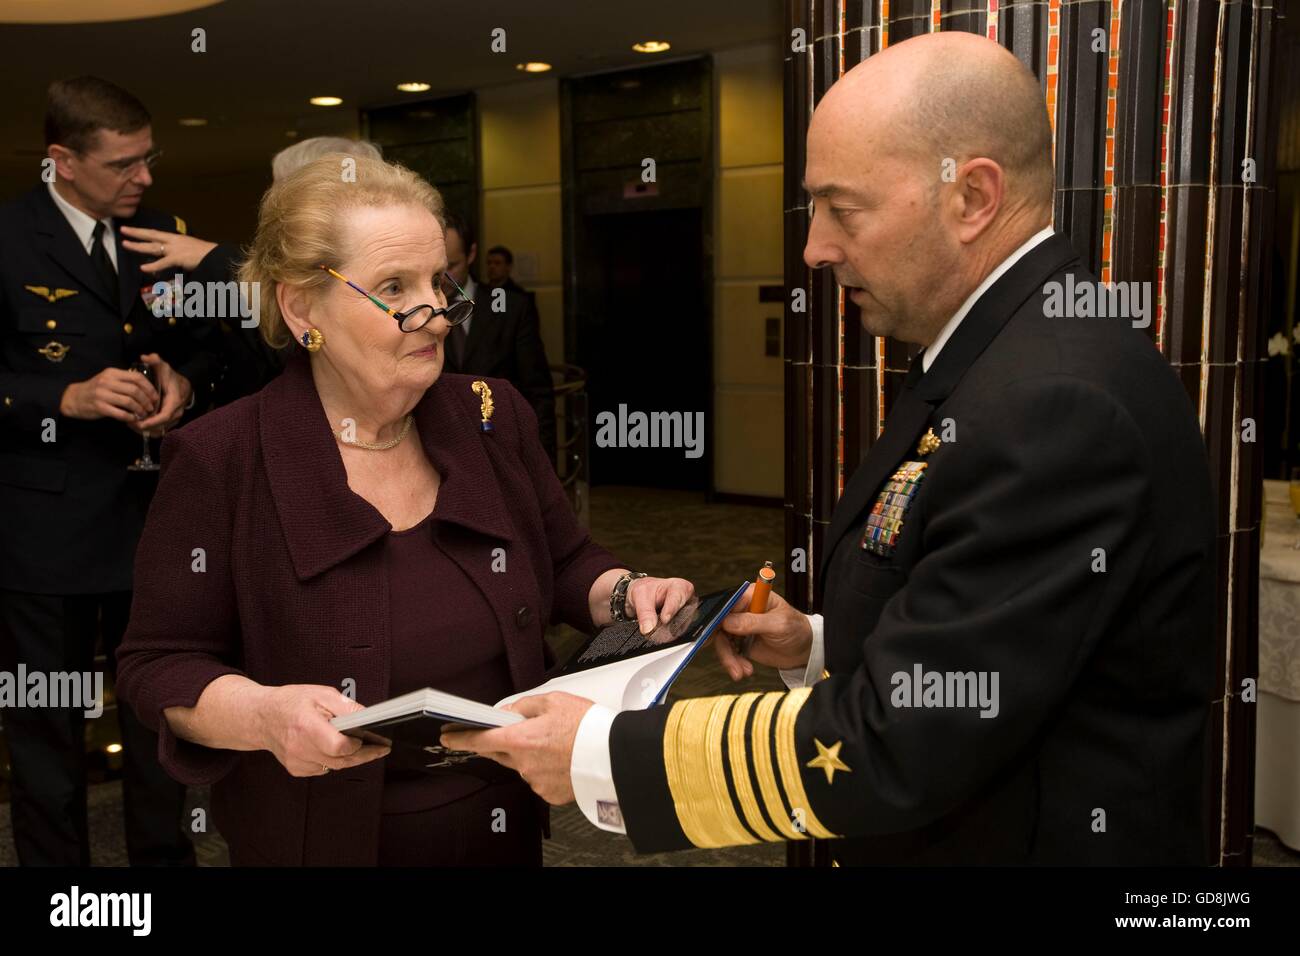 U.S Adm. James Stavridis, European Command and NATO Supreme Allied Commander, speaks with former Secretary of State Madeleine Albright during a visit to the Joint Forces Command Headquarters November 13, 2009 in Vrhinka, Slovenia. Stock Photo